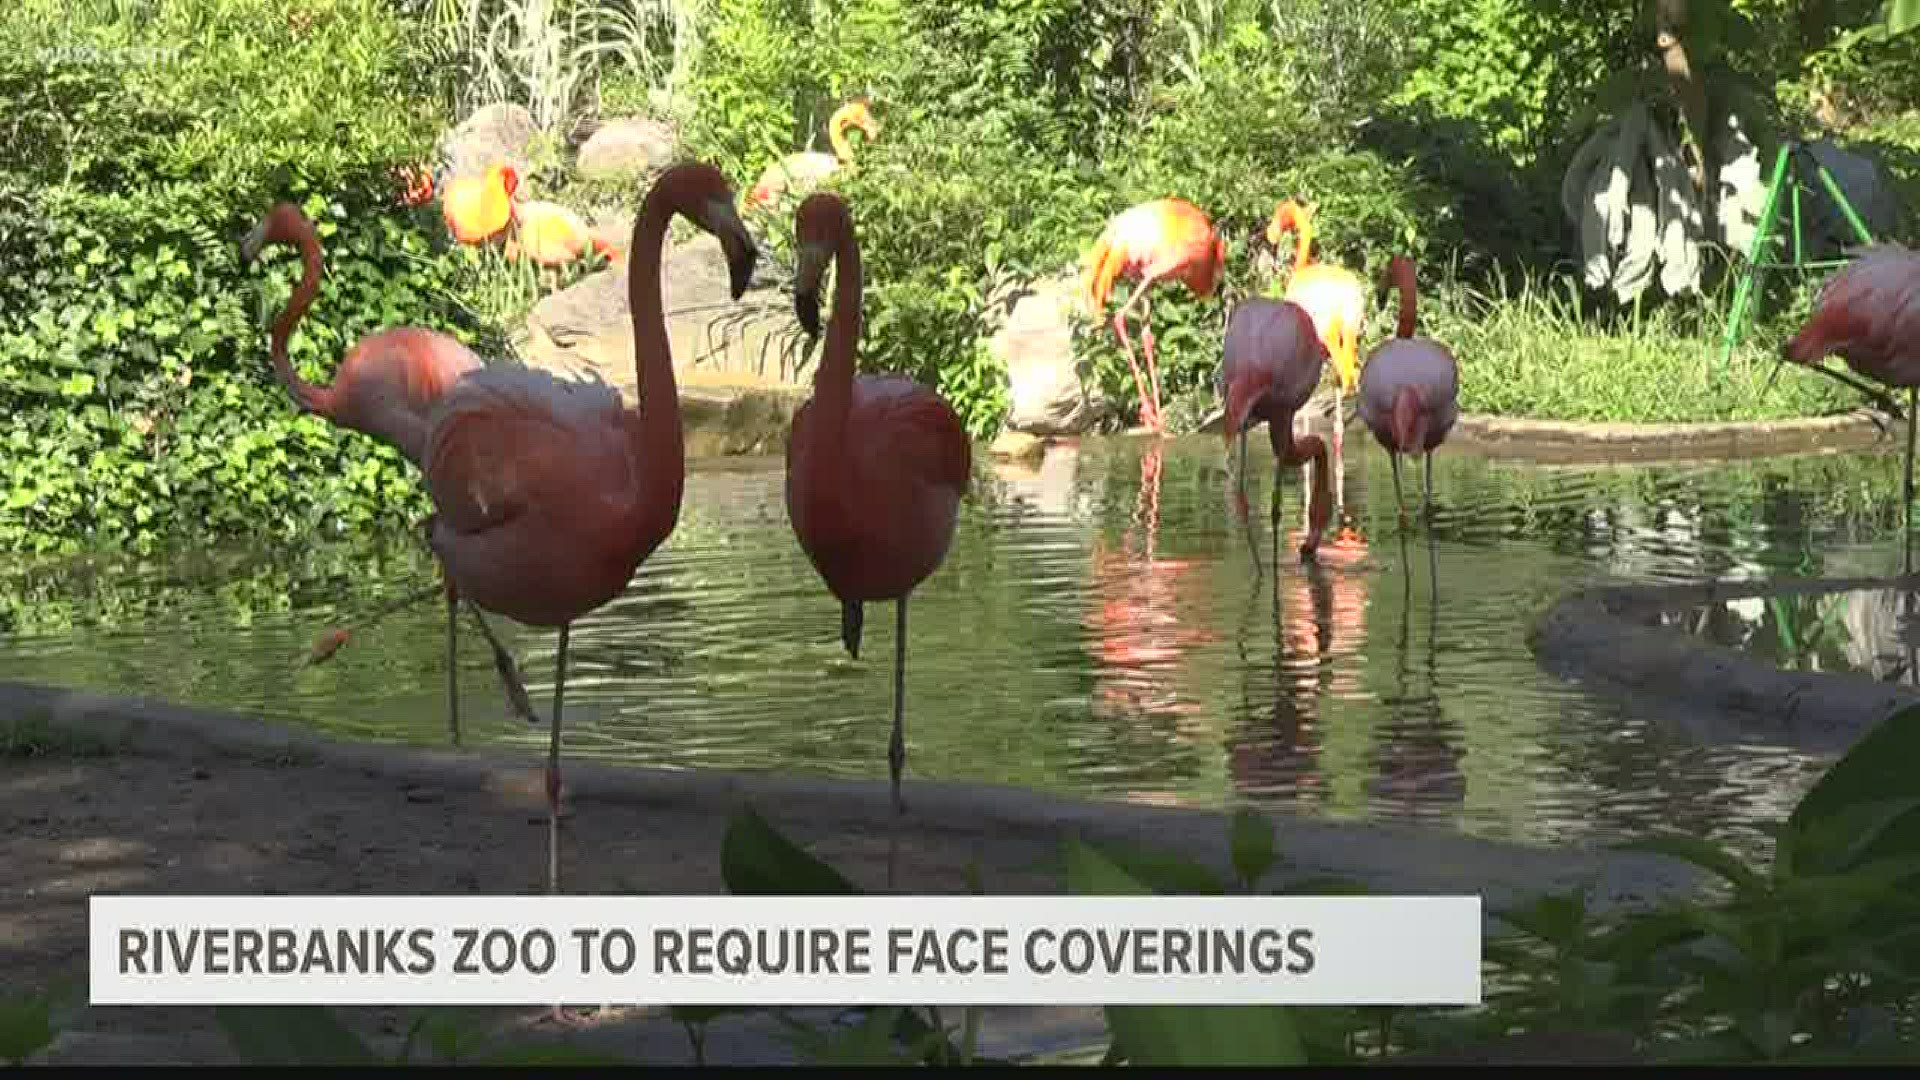 If you visit the zoo or the mall just make sure to have your mask ready